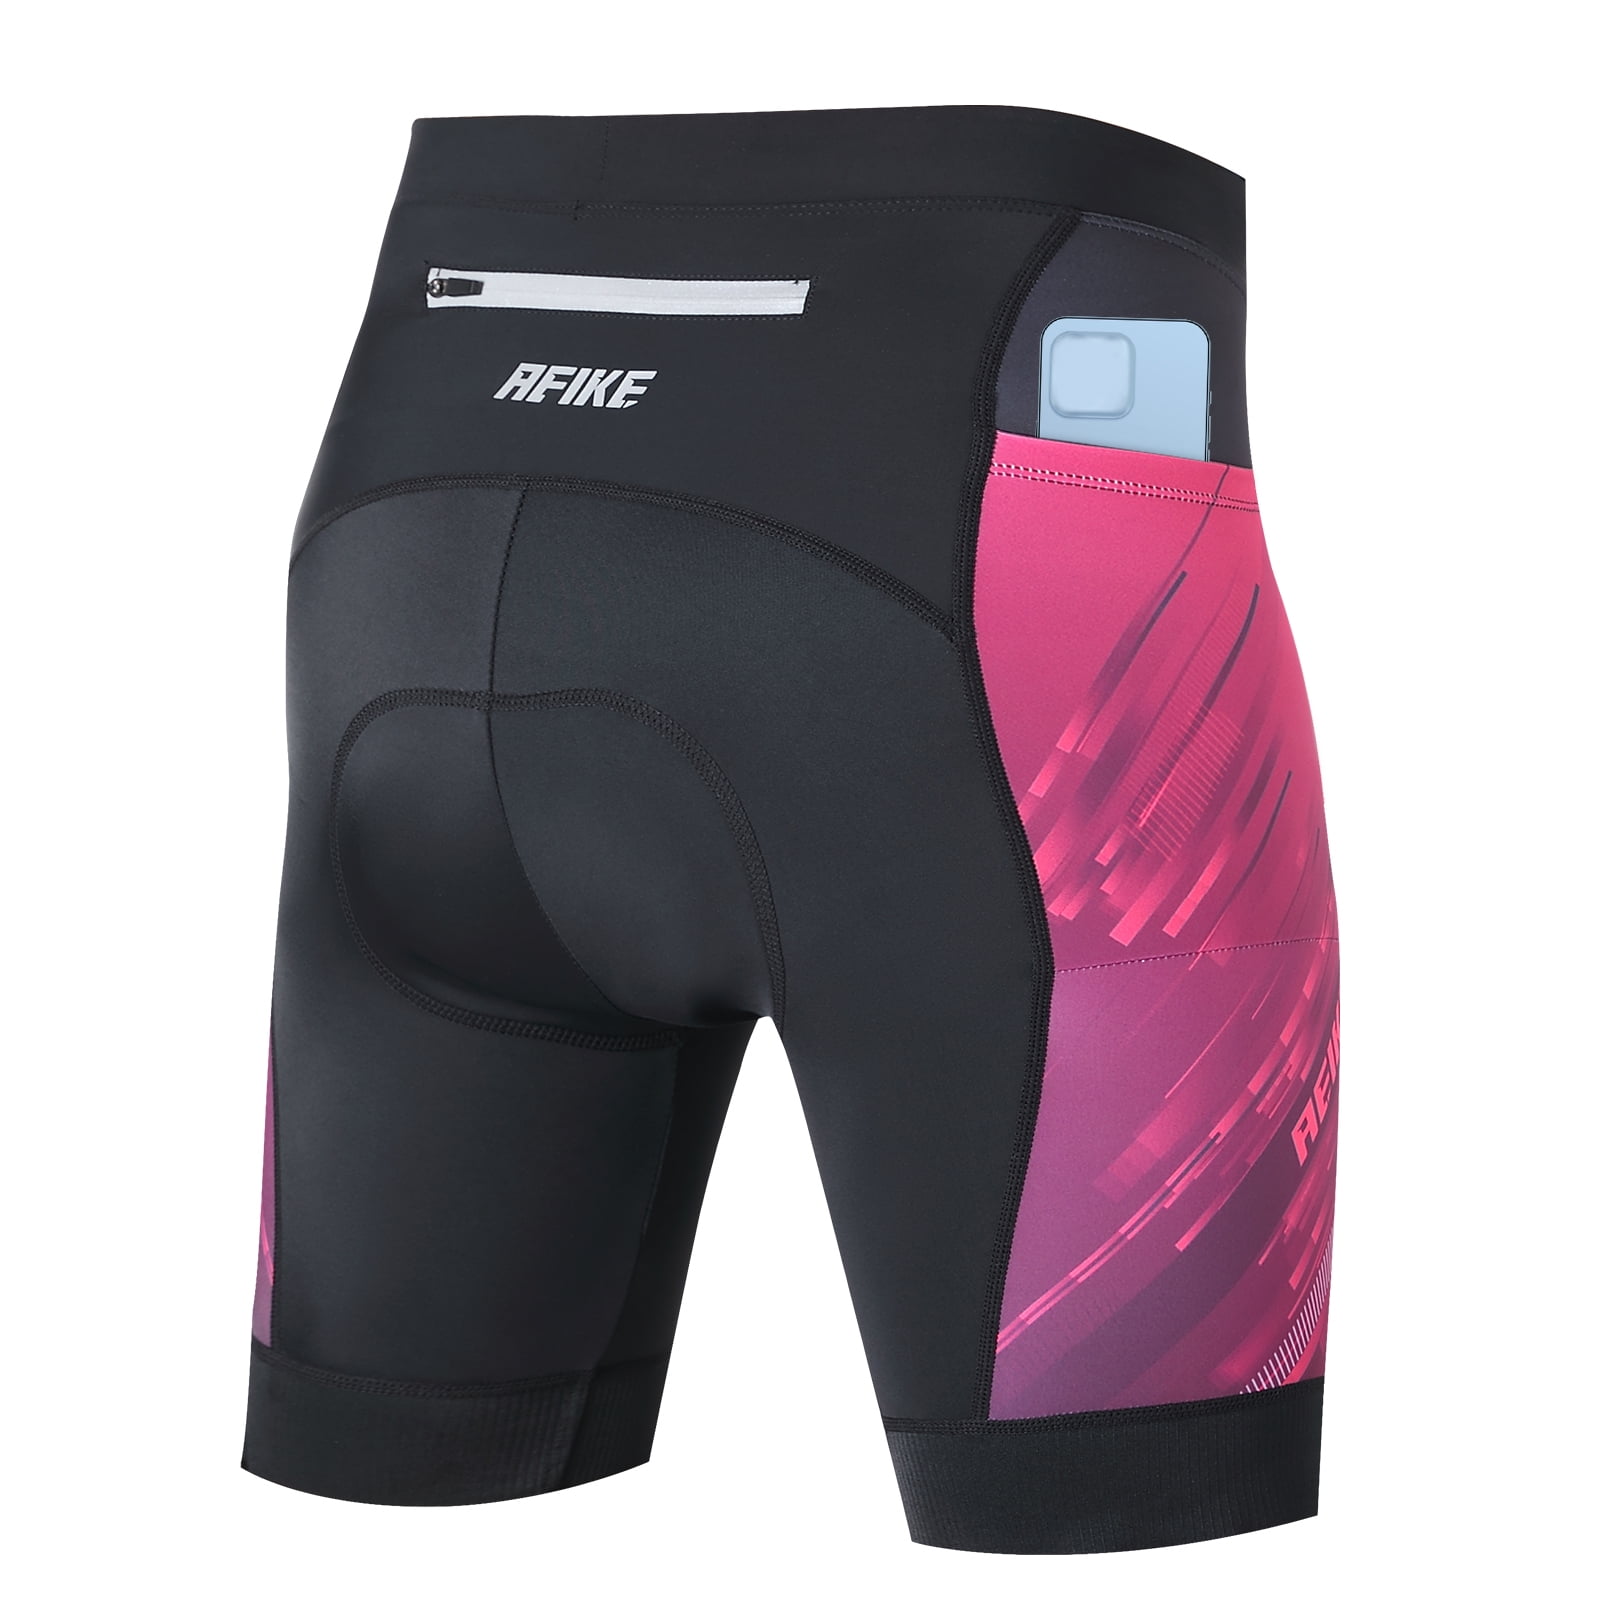 Aeike Women's Cycling Shorts Bike Shorts Padded Bicycle Tights For Riding